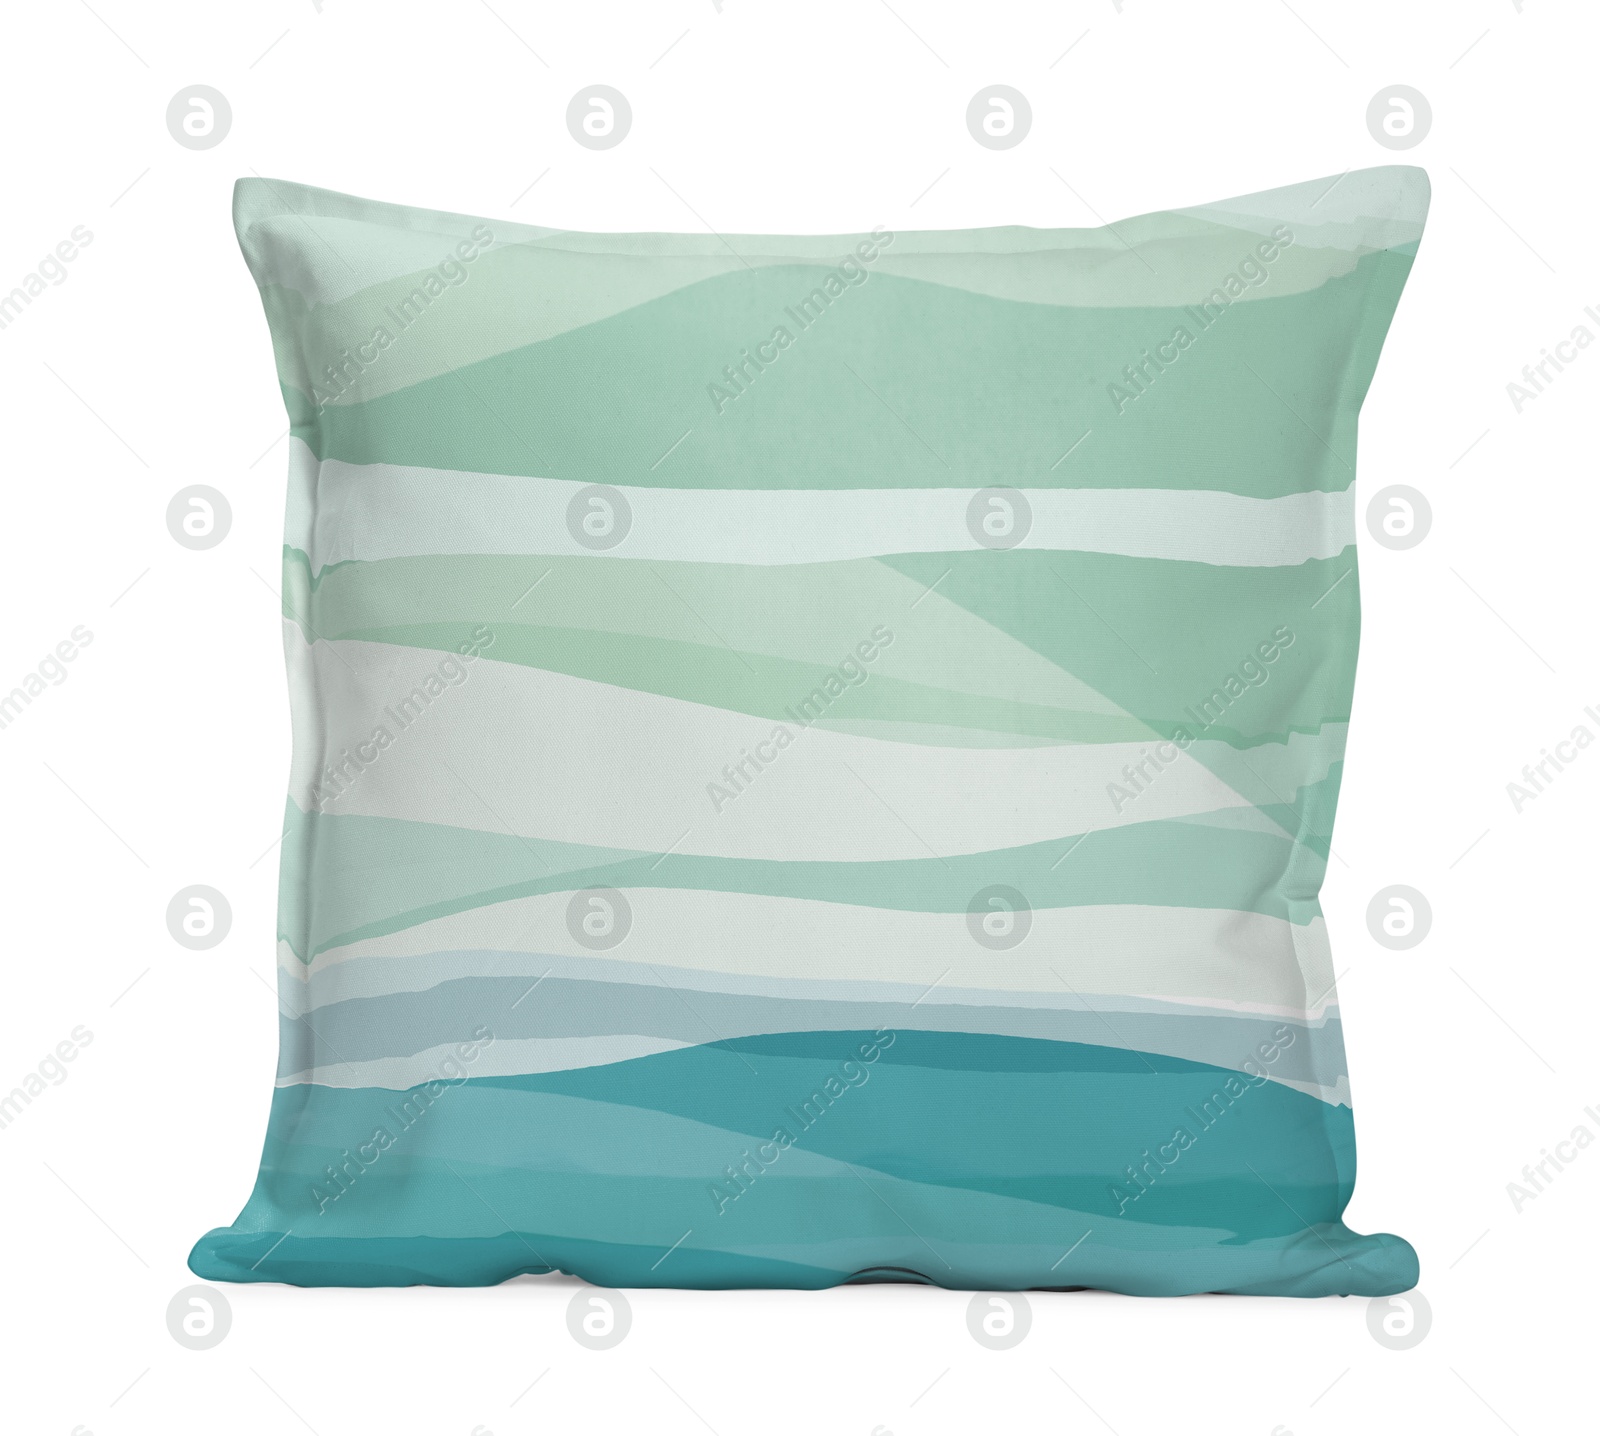 Image of Soft pillow with stylish print isolated on white